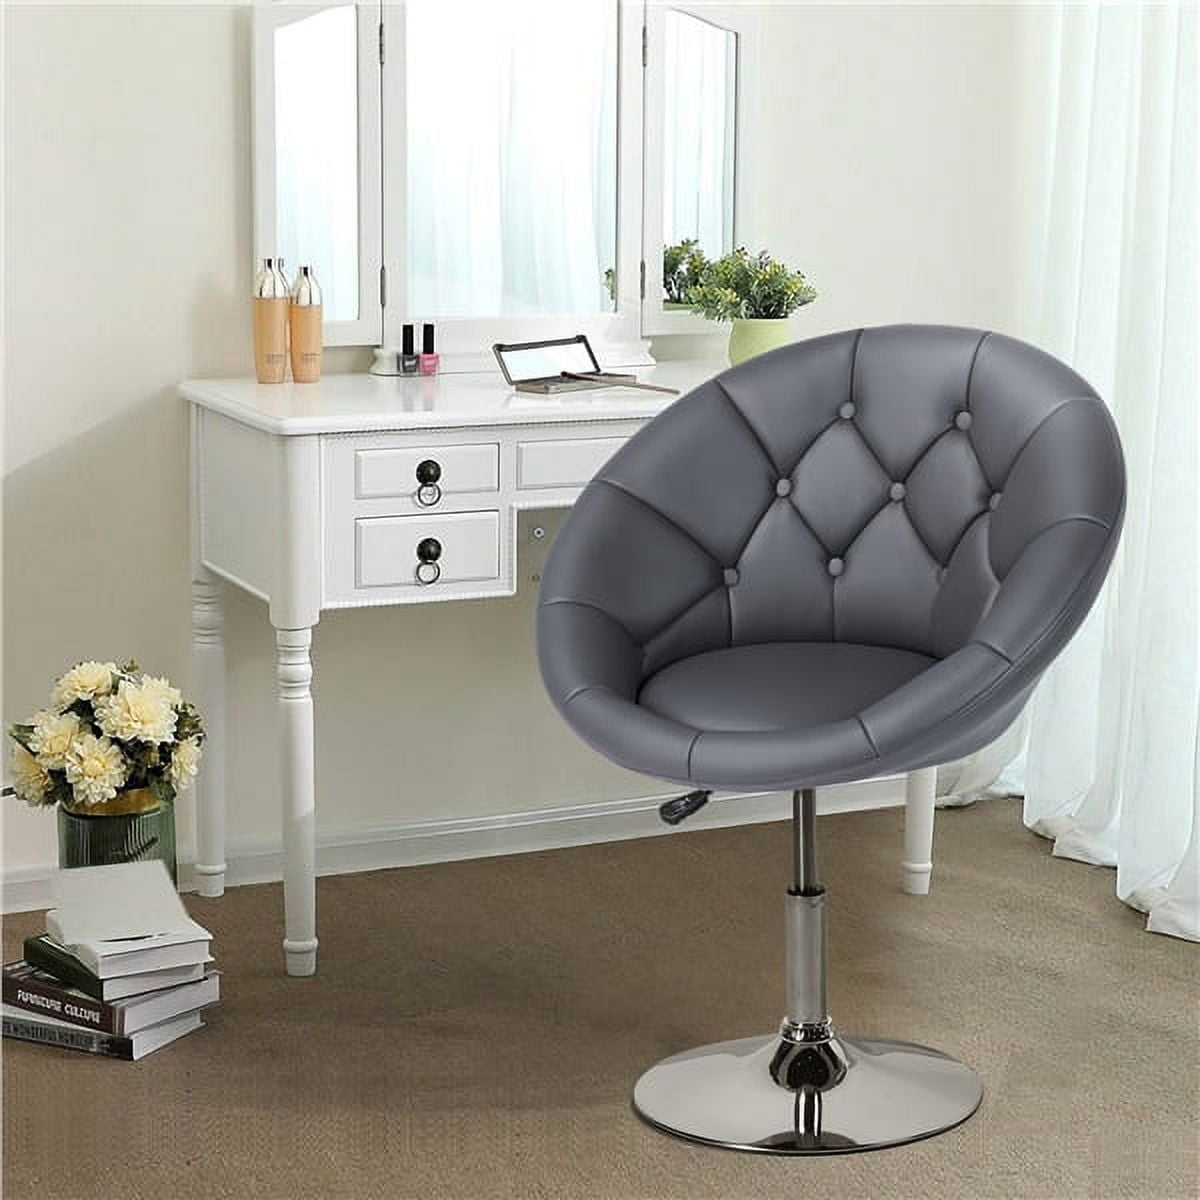 Alden Design Modern Tufted Adjustable Barrel Swivel Accent Chair, Gray Faux Leather $65 + Free Shipping